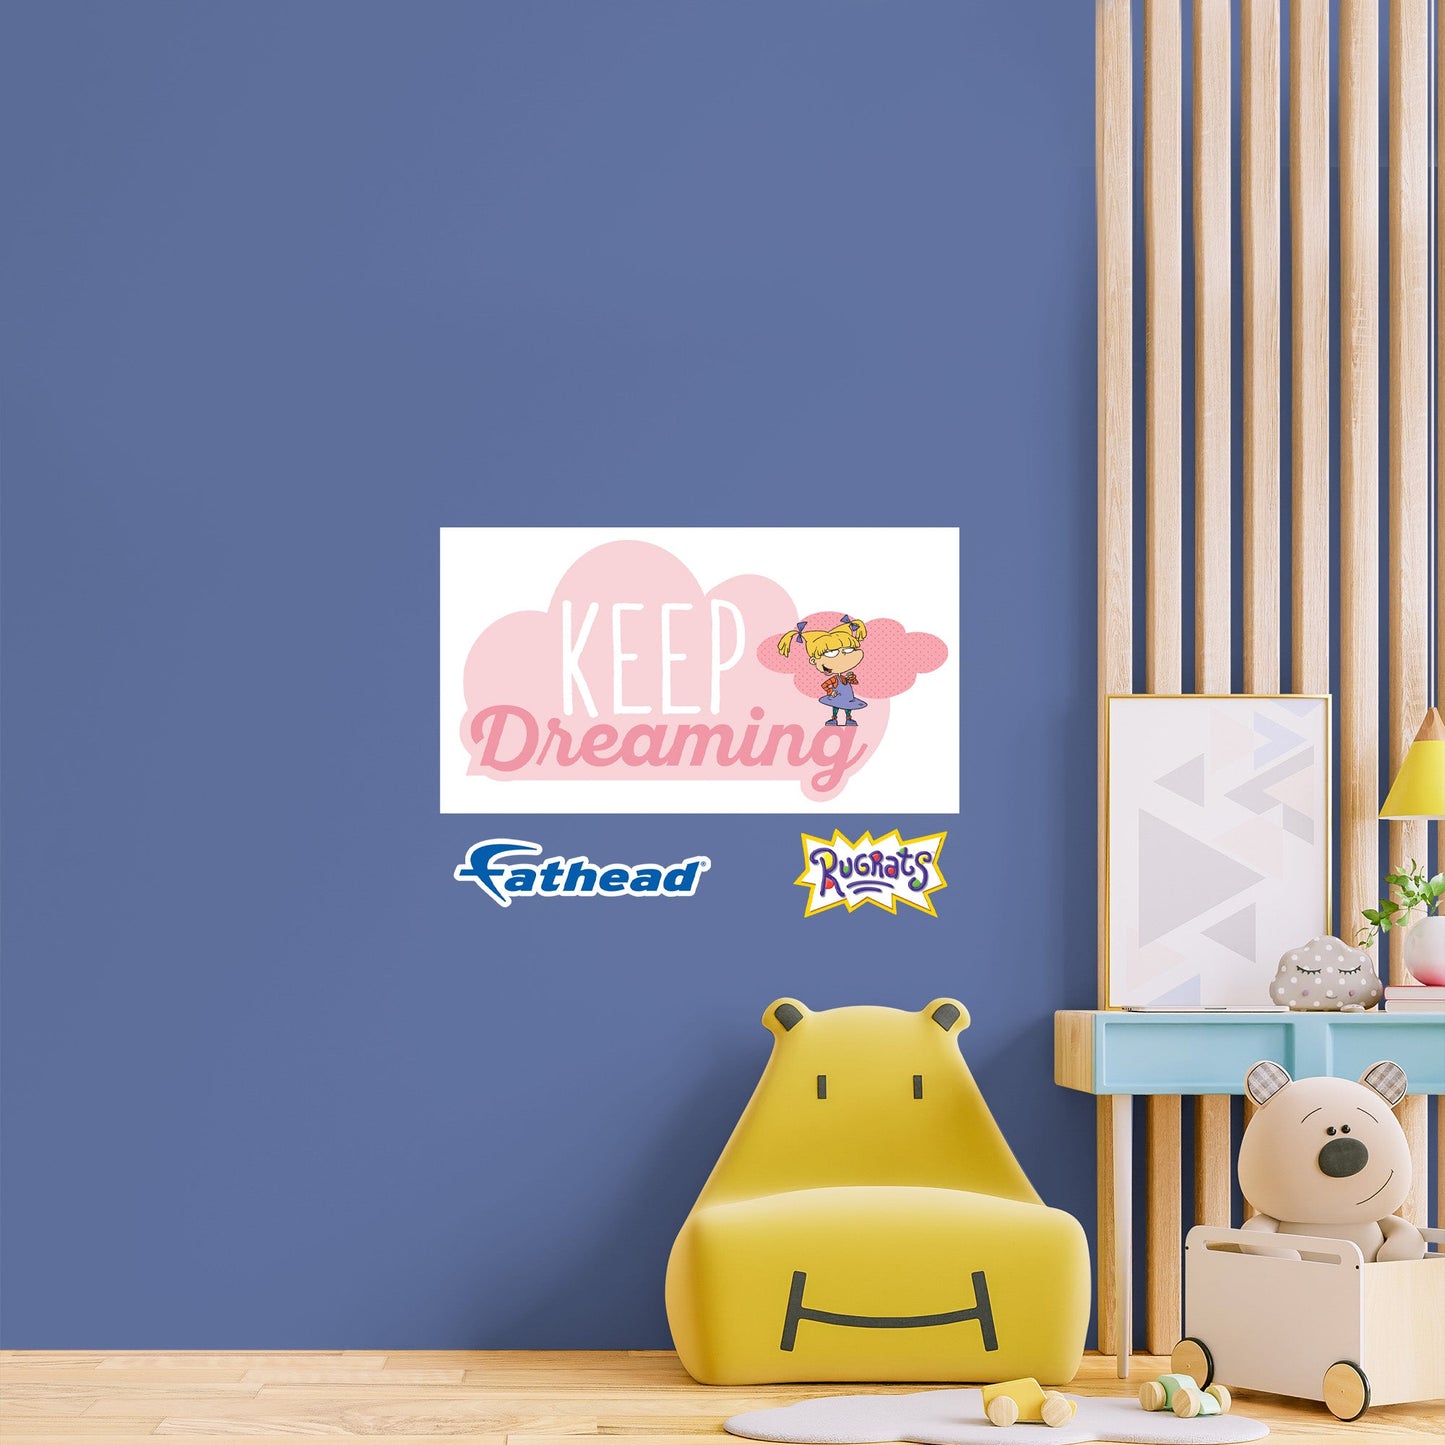 Rugrats: Keep Dreaming Poster - Officially Licensed Nickelodeon Removable Adhesive Decal